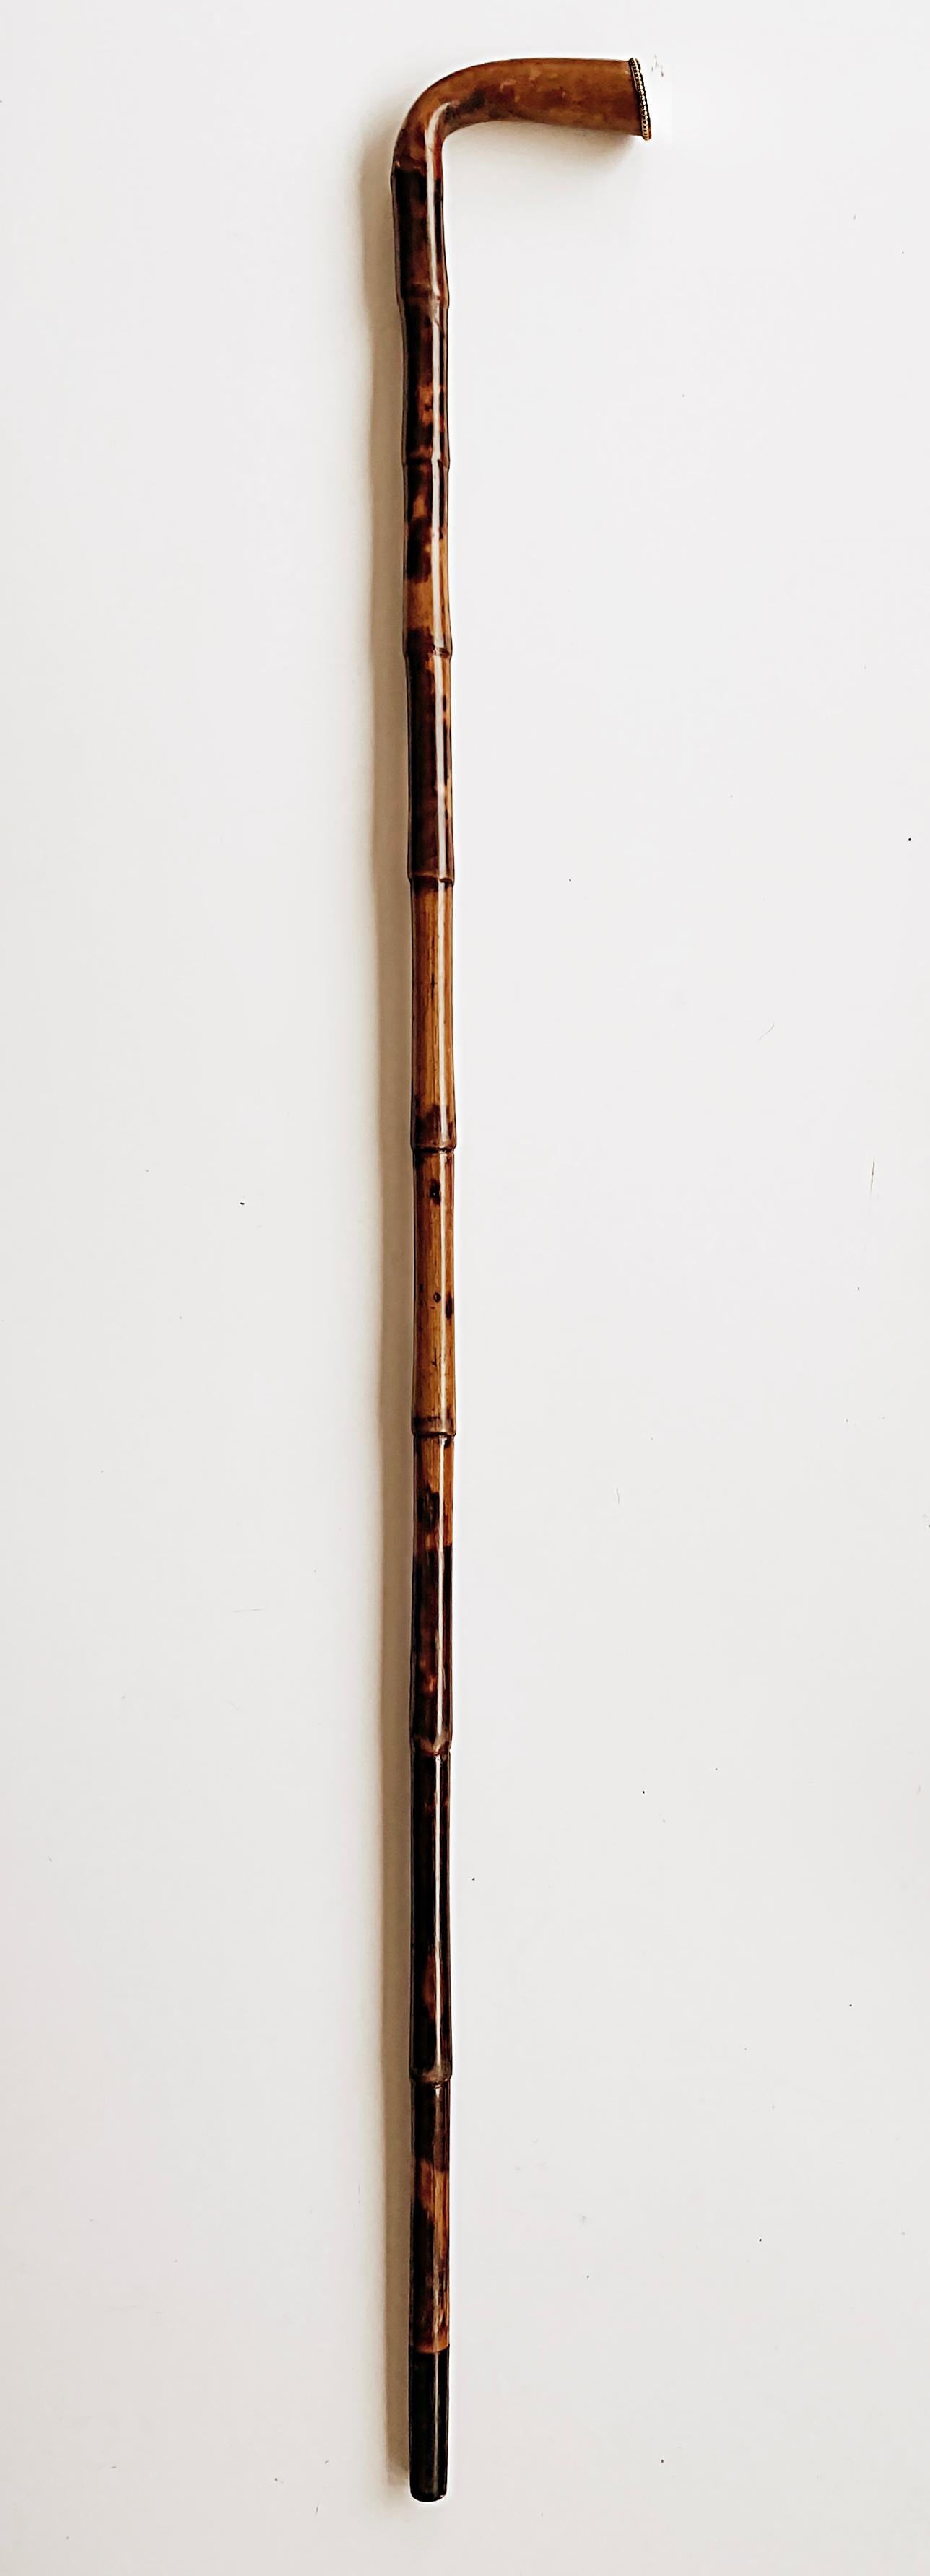 Rattan Walking Stick Gold cap Monogrammed Christmas 1895, Bamboo

Offered for sale is a late 19th century antique rattan/bamboo walking stick that has a gold beaded end cap on the handle. The gold cap is elegantly engraved
